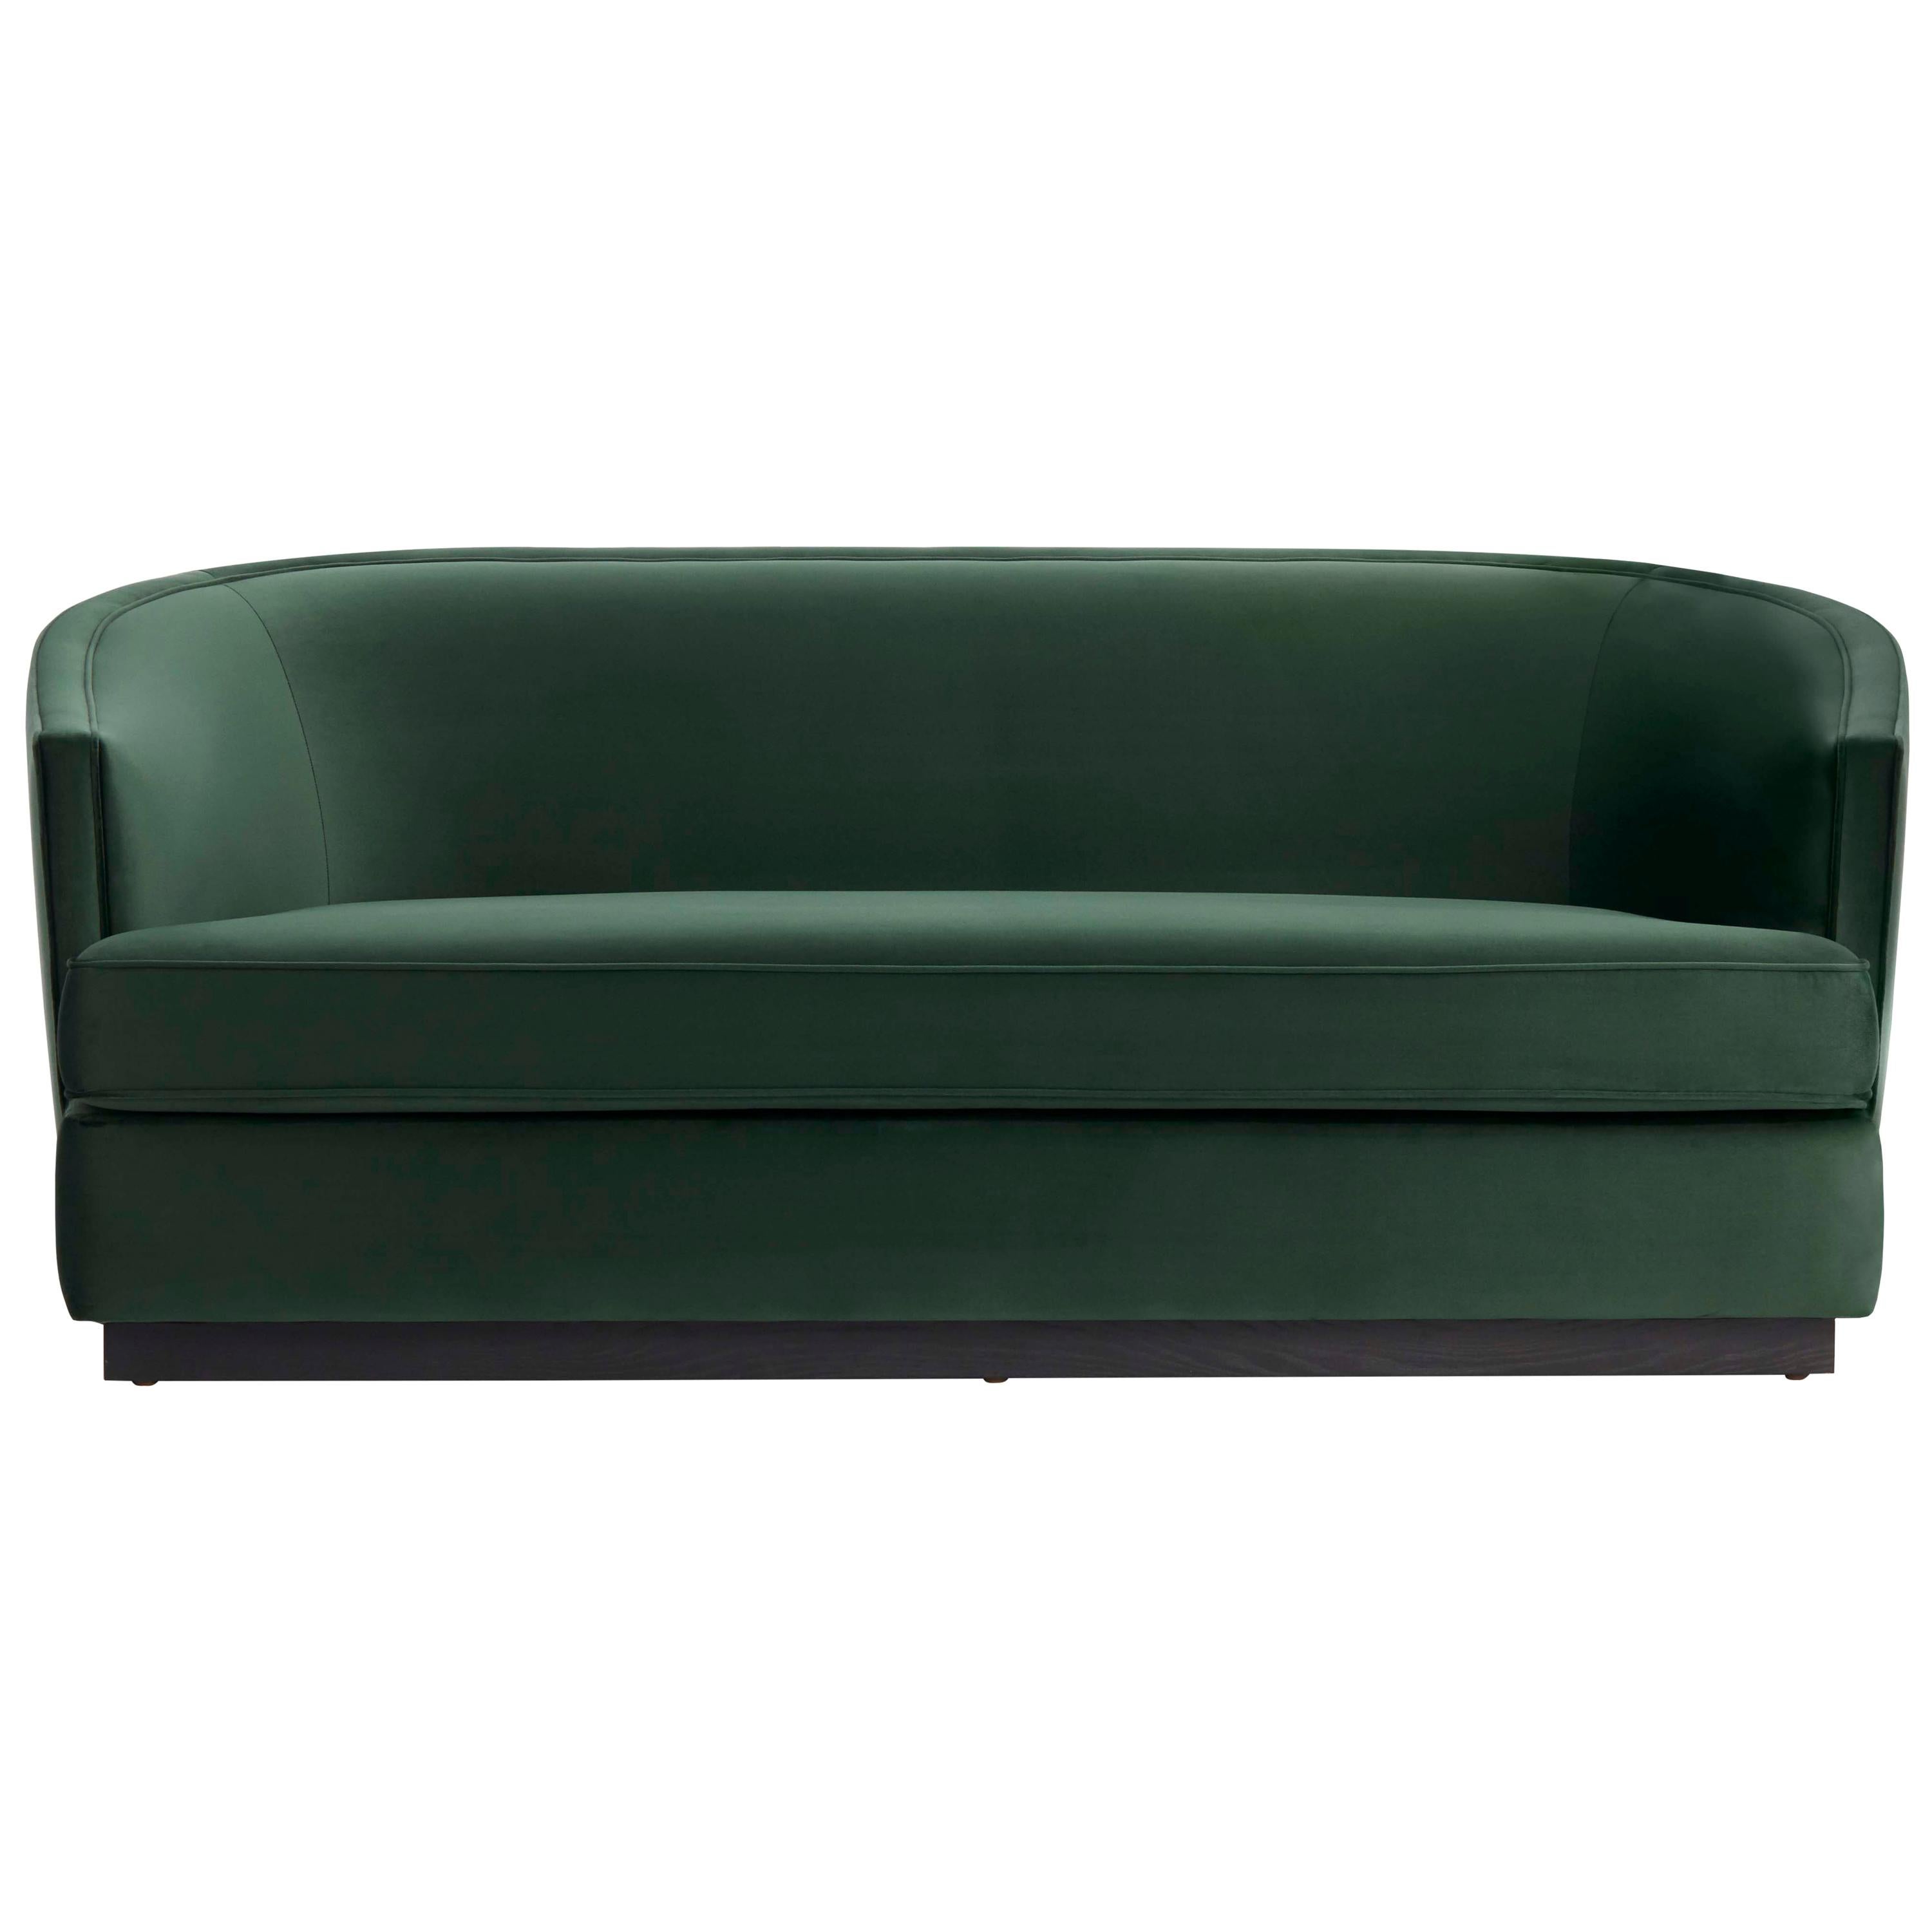 ROMANA 2-Seat Sofa with Painted Wooden Plinth